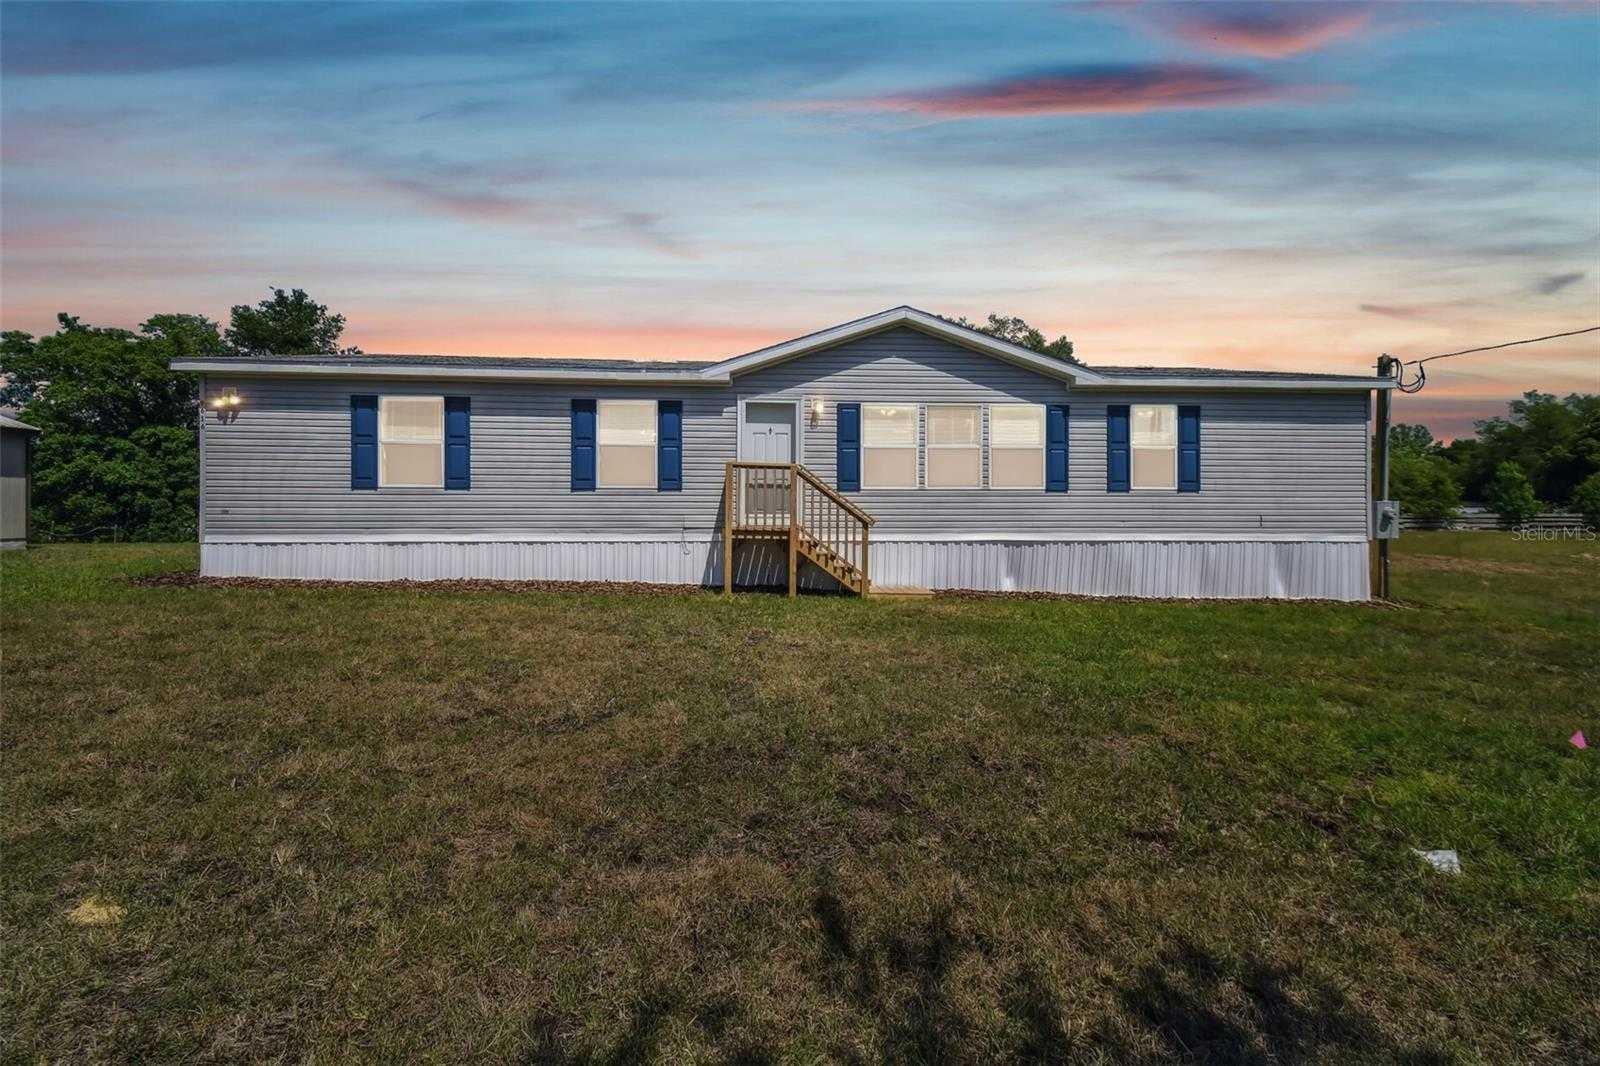 9616 SILVERBEND, DADE CITY, Manufactured Home - Post 1977,  for sale, The Mount Dora Group 